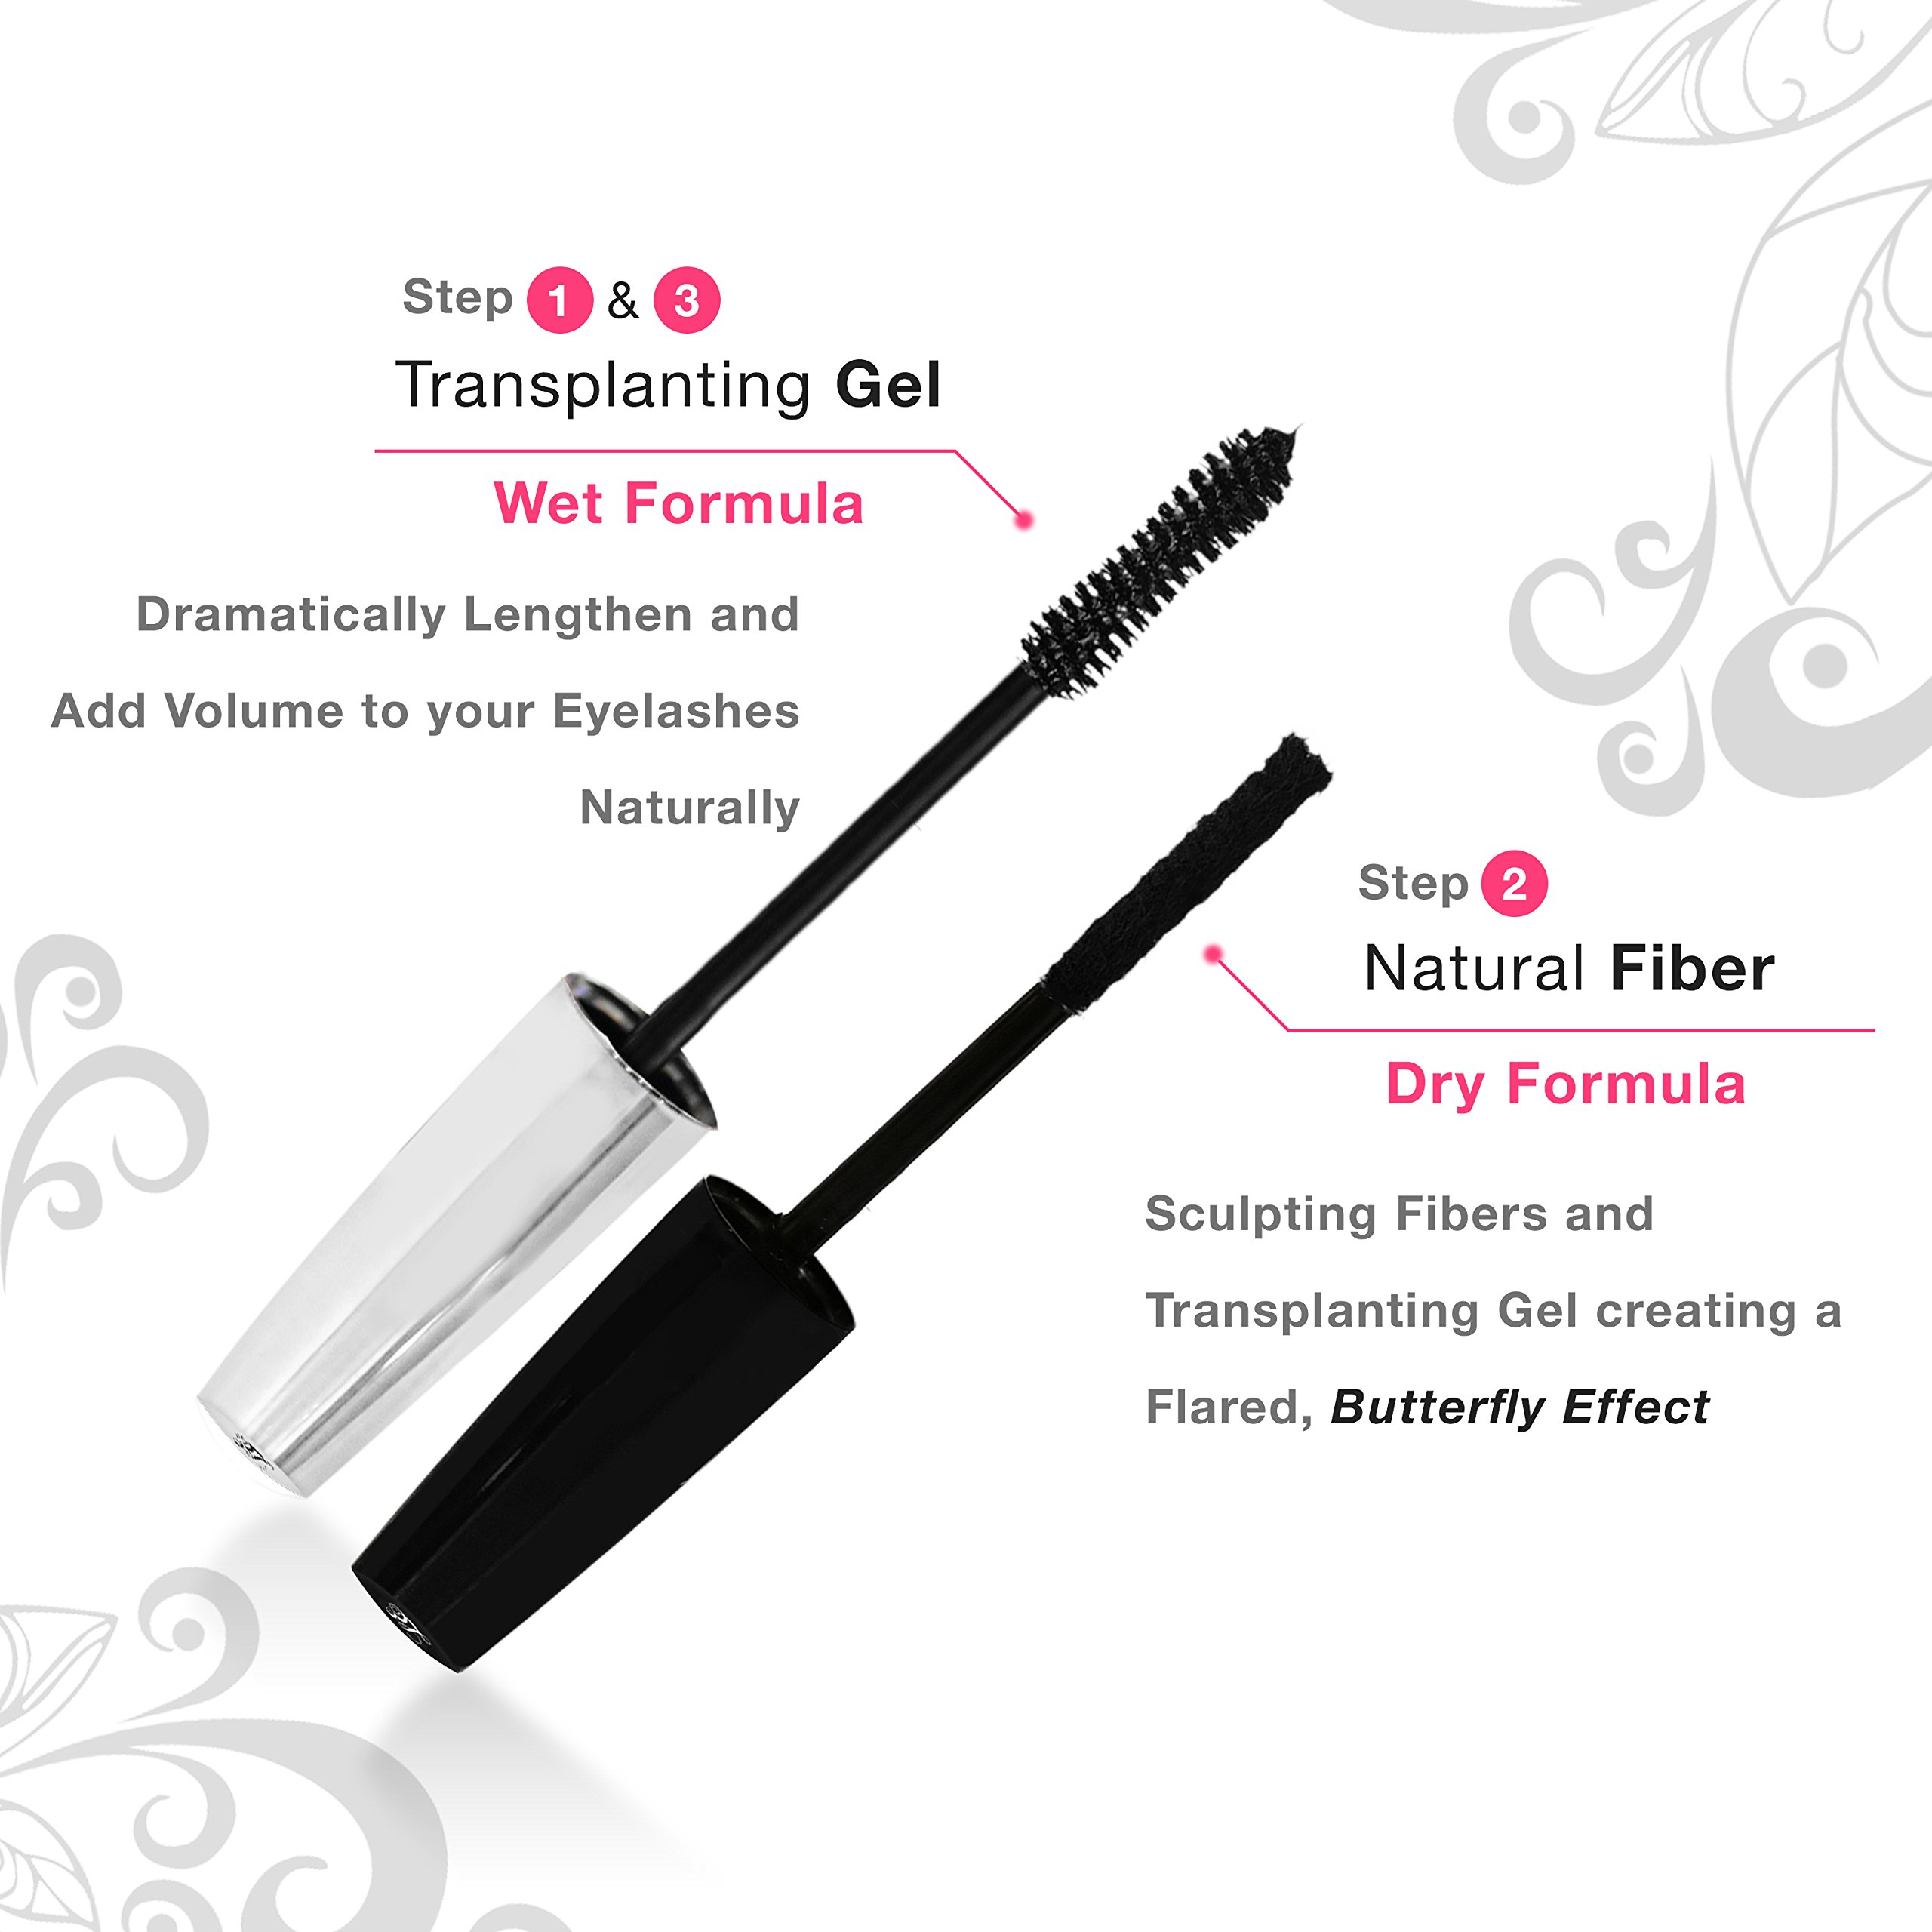 400x Silk Fiber Lash Mascara - Best for Thickening & Lengthening Eyelashes - Premium Quality, Last All Day, Waterproof, Smudge proof, Hypoallergenic - Includes Carry Case